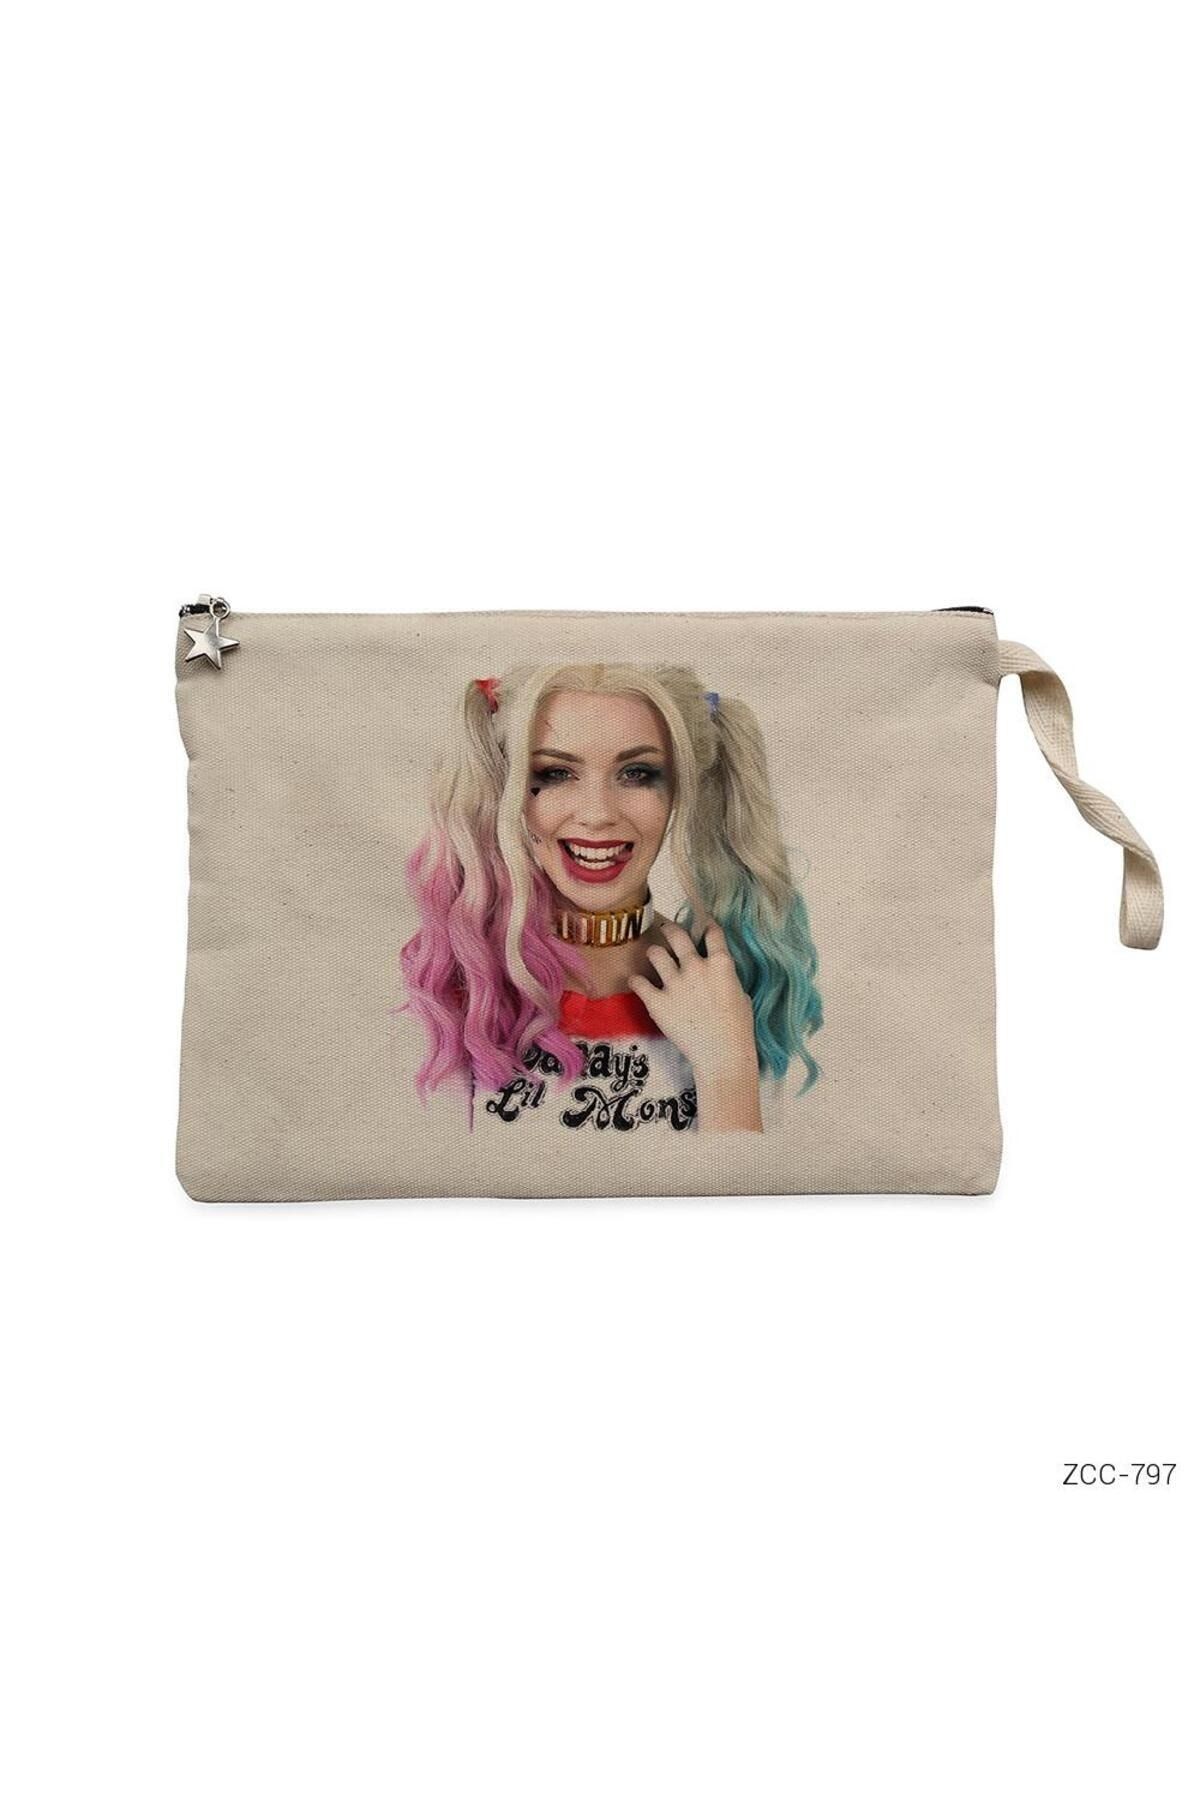 DC Comics Suicide Squad Harley Quinn Mini Backpack | BoxLunch